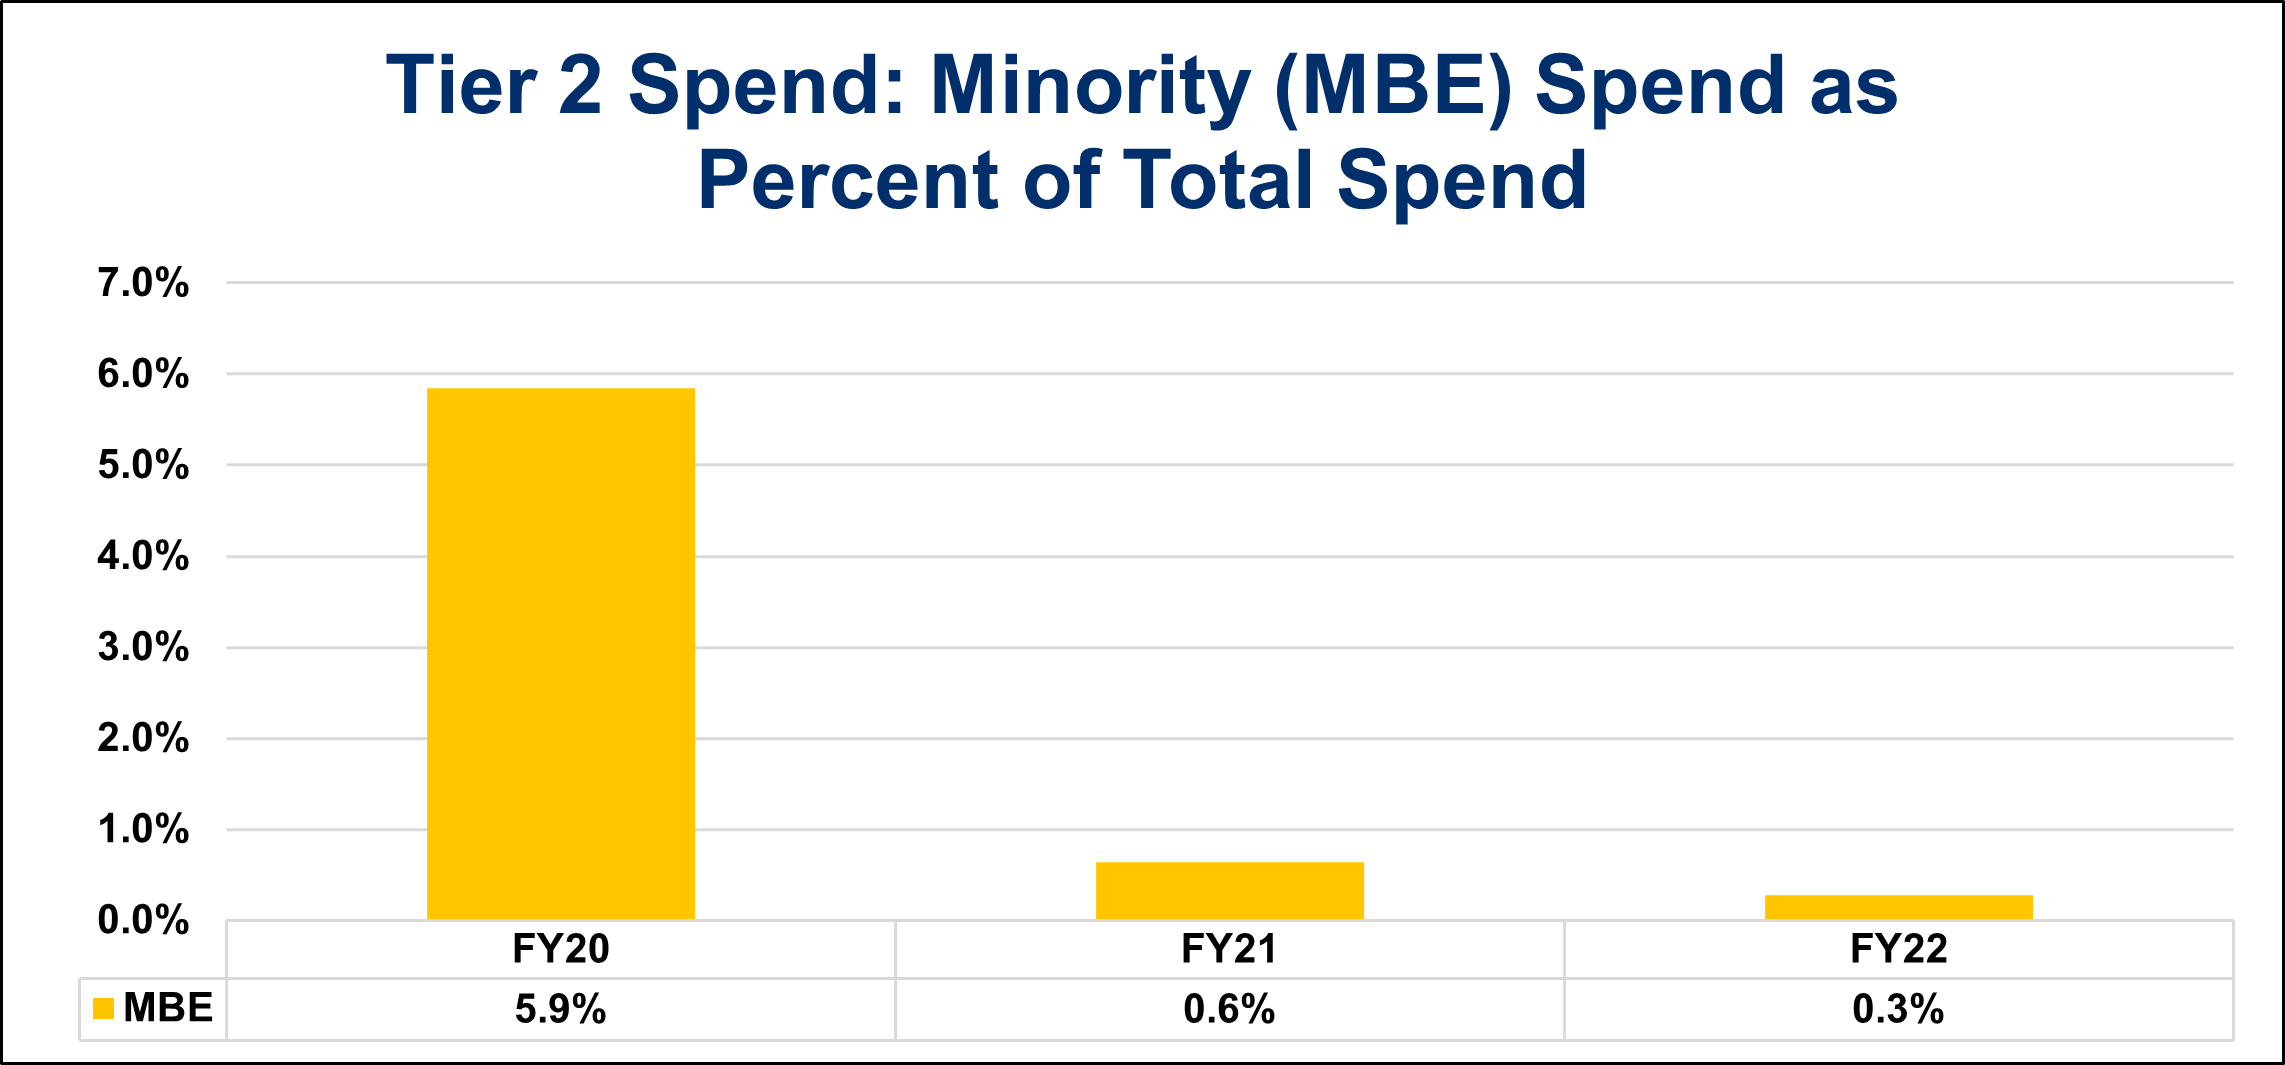 Tier 2 Spend: Minority (MBE) Spend as Percent of Total Spend